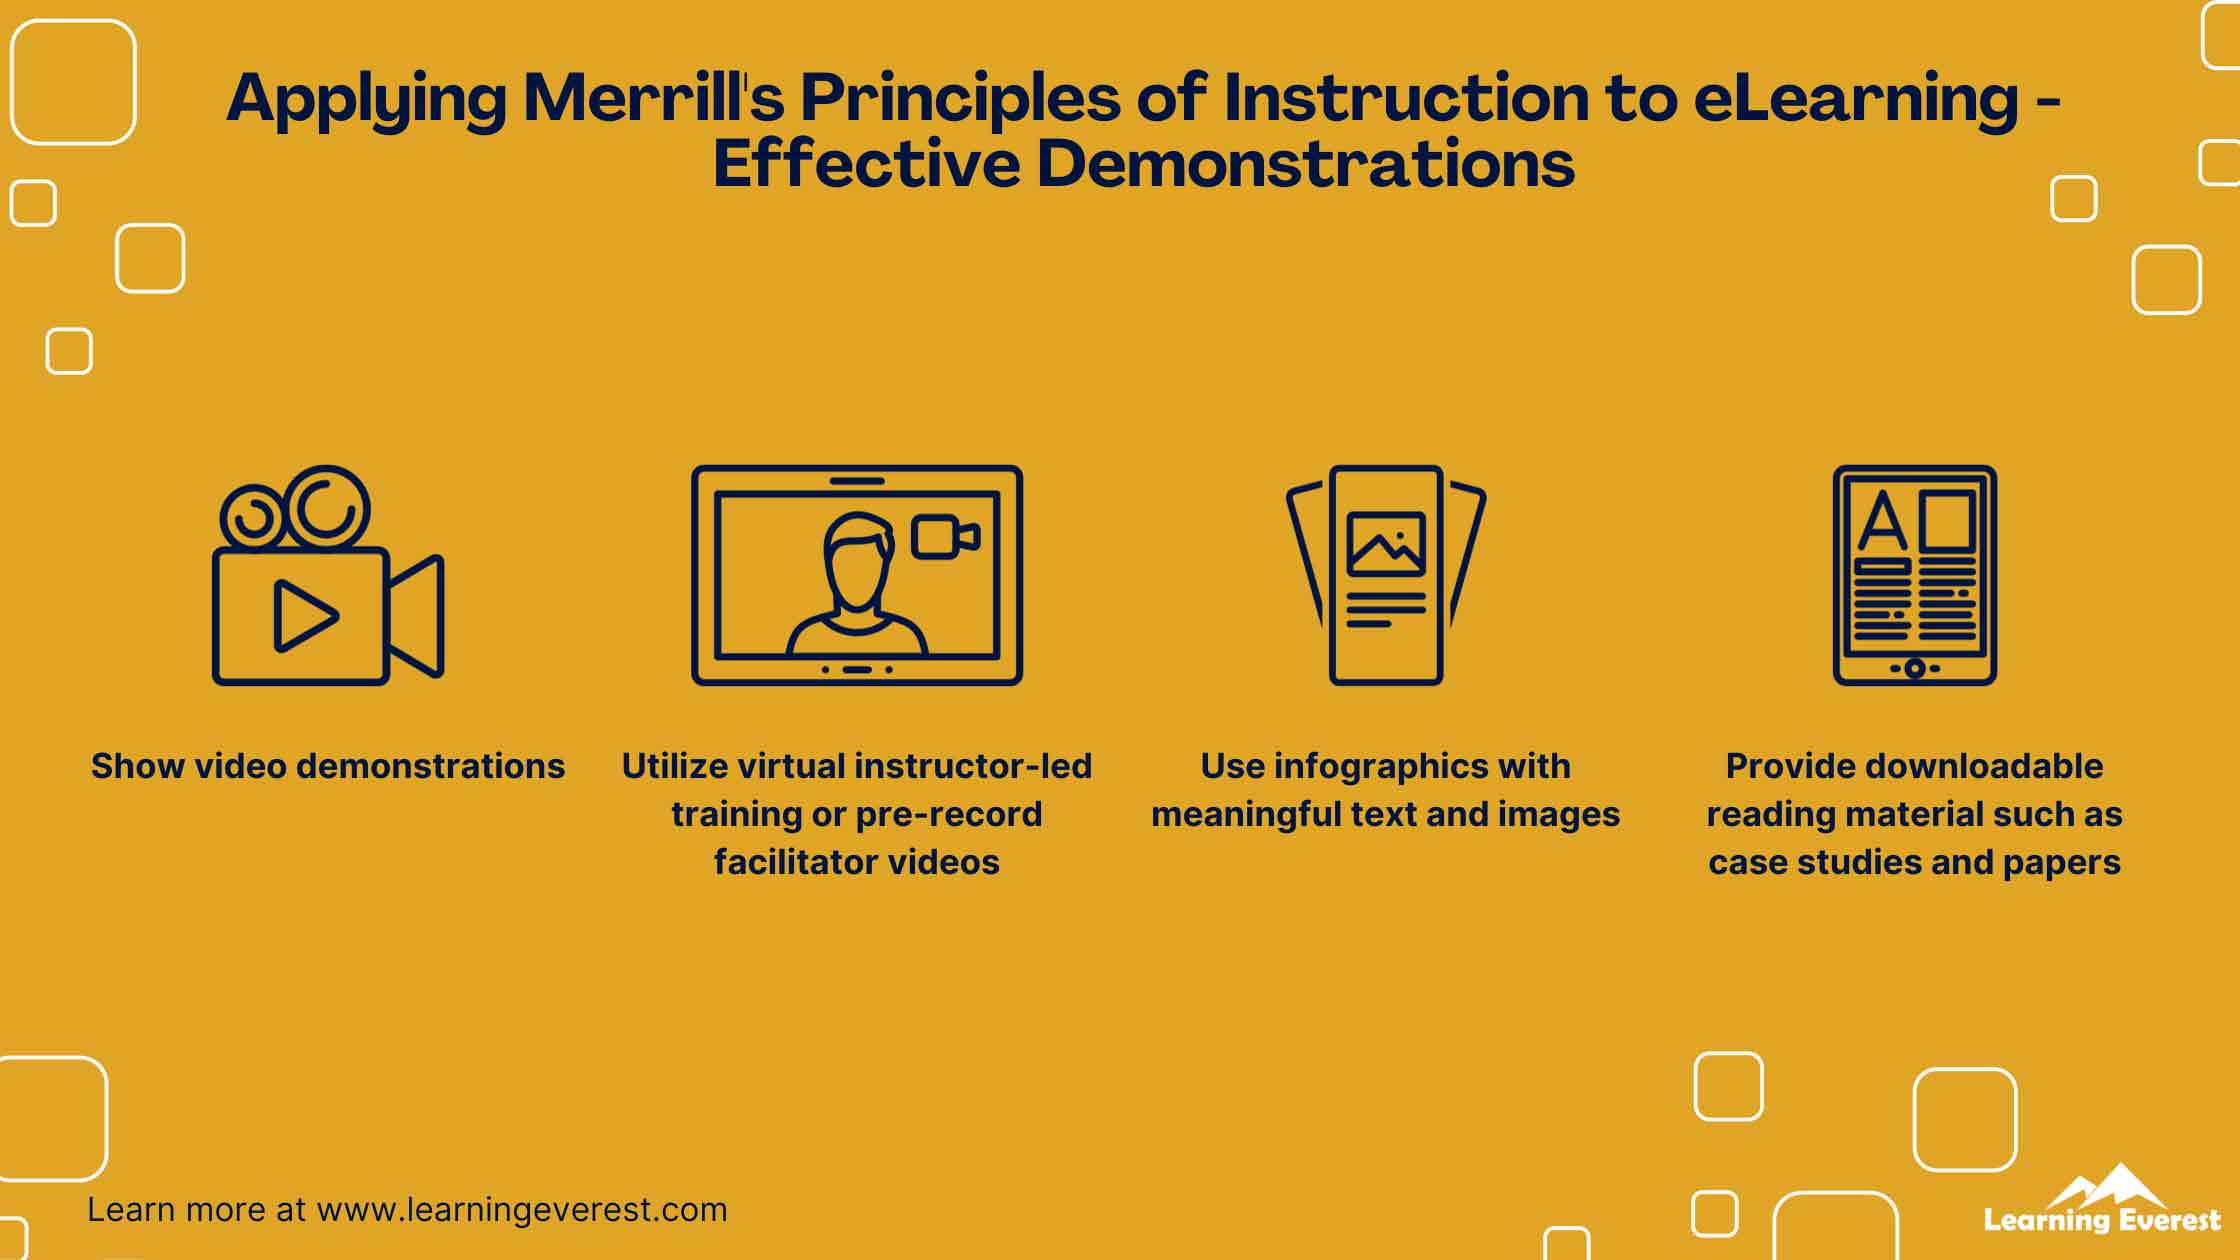 Applying Merrill's Principles of Instruction to eLearning - Effective Demonstrations